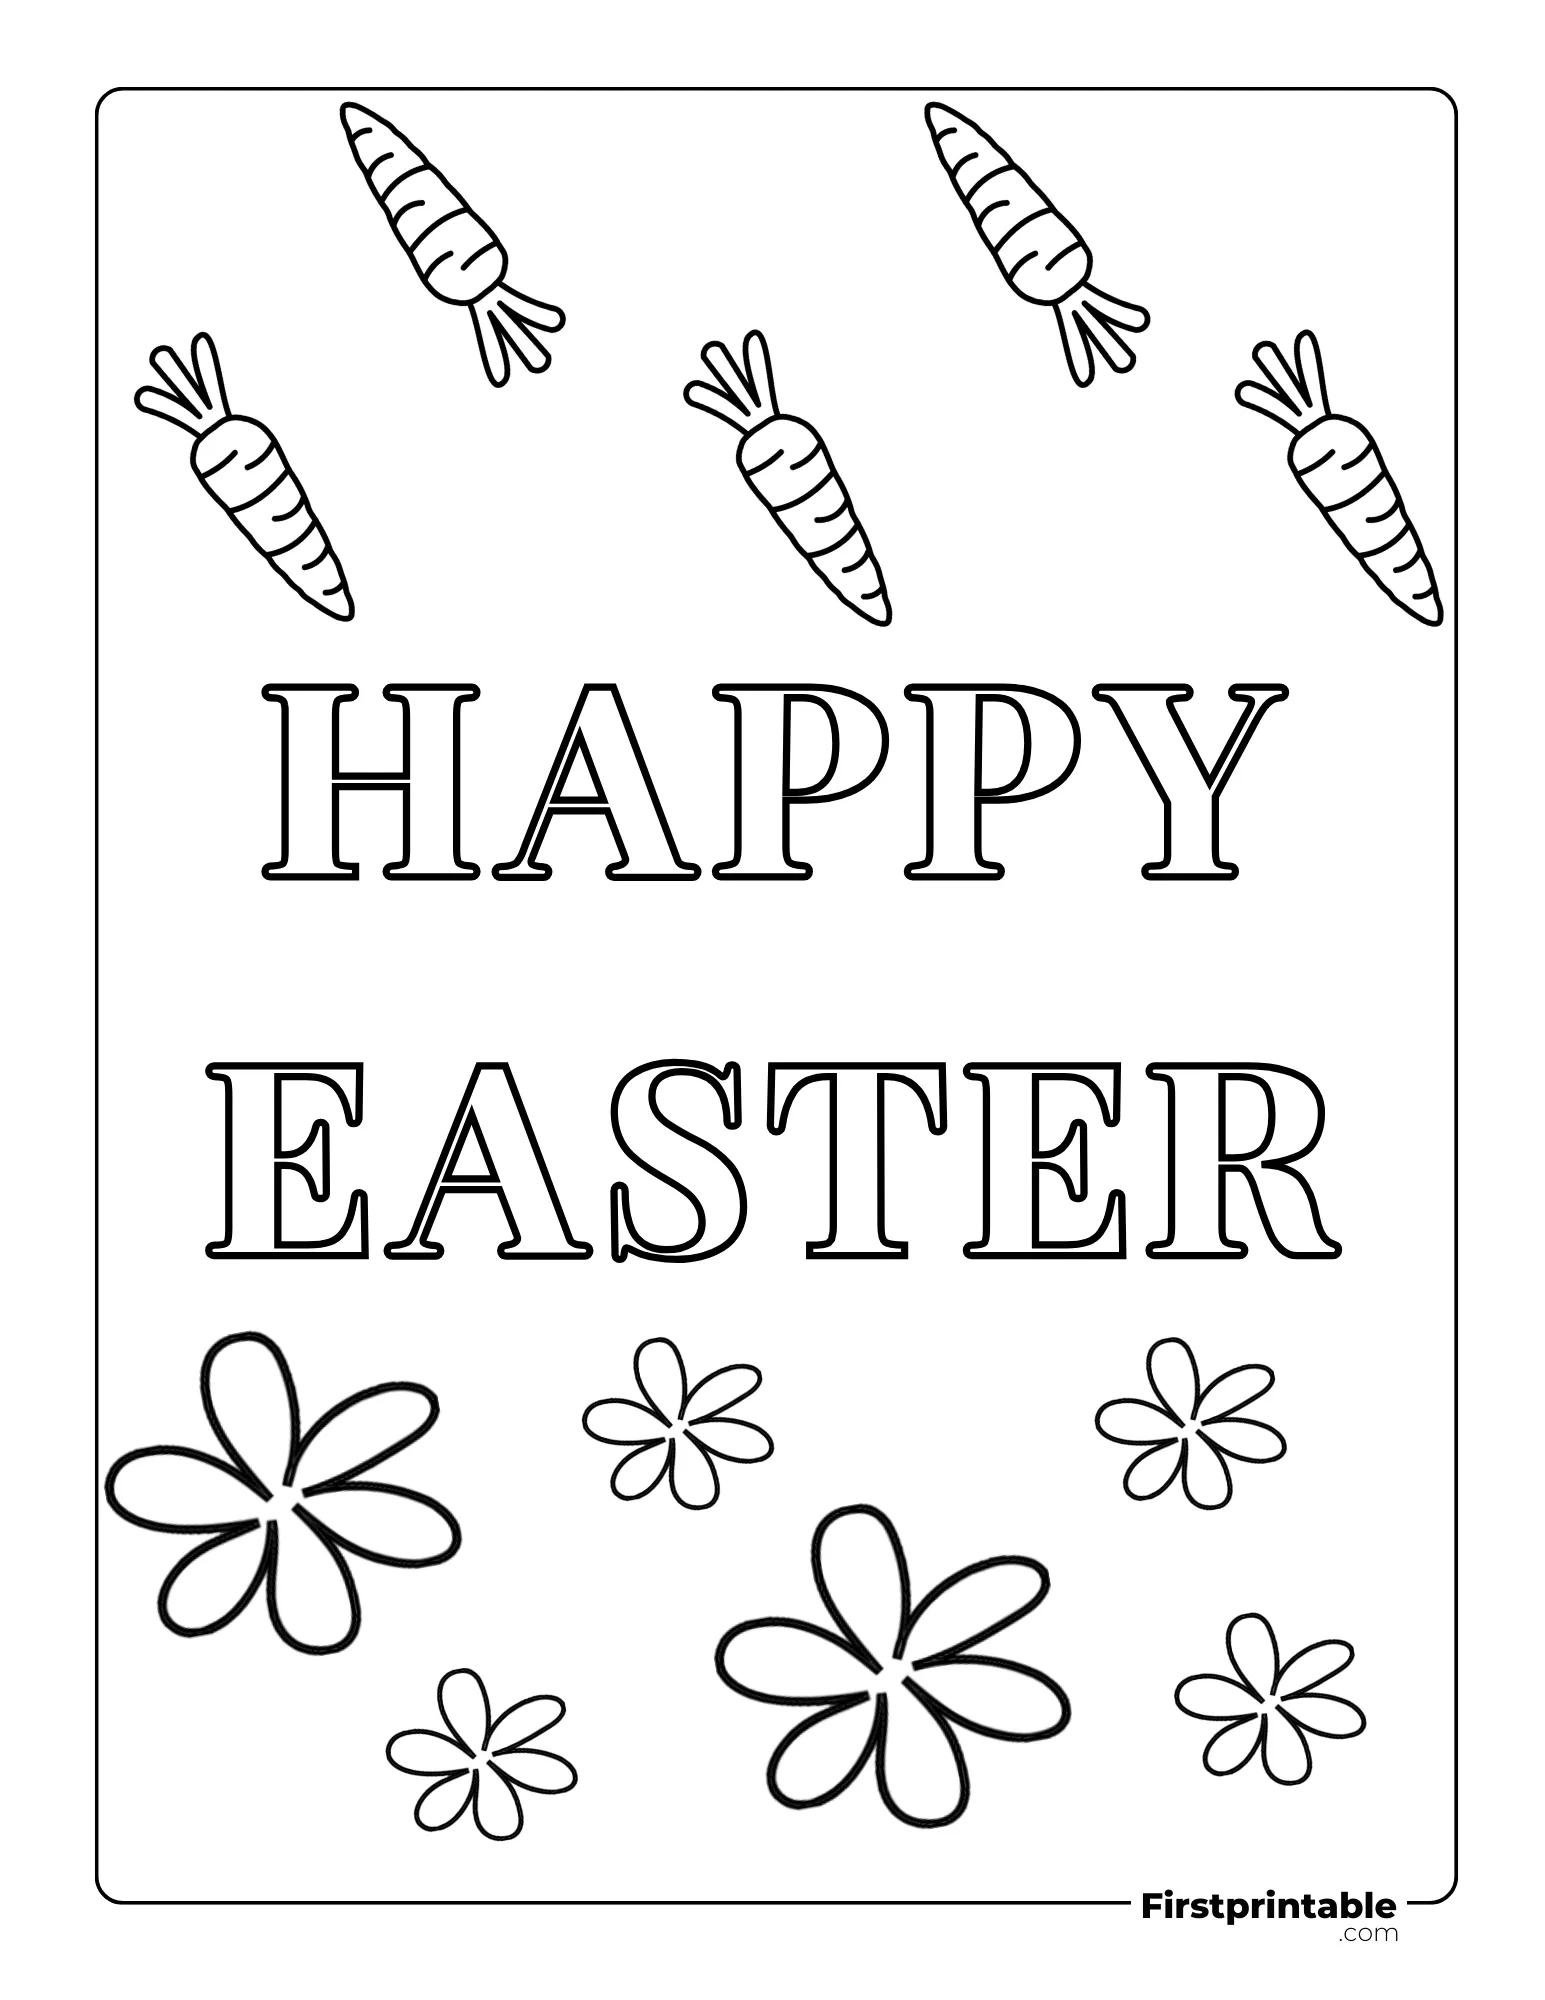 Happy Easter coloring page 3